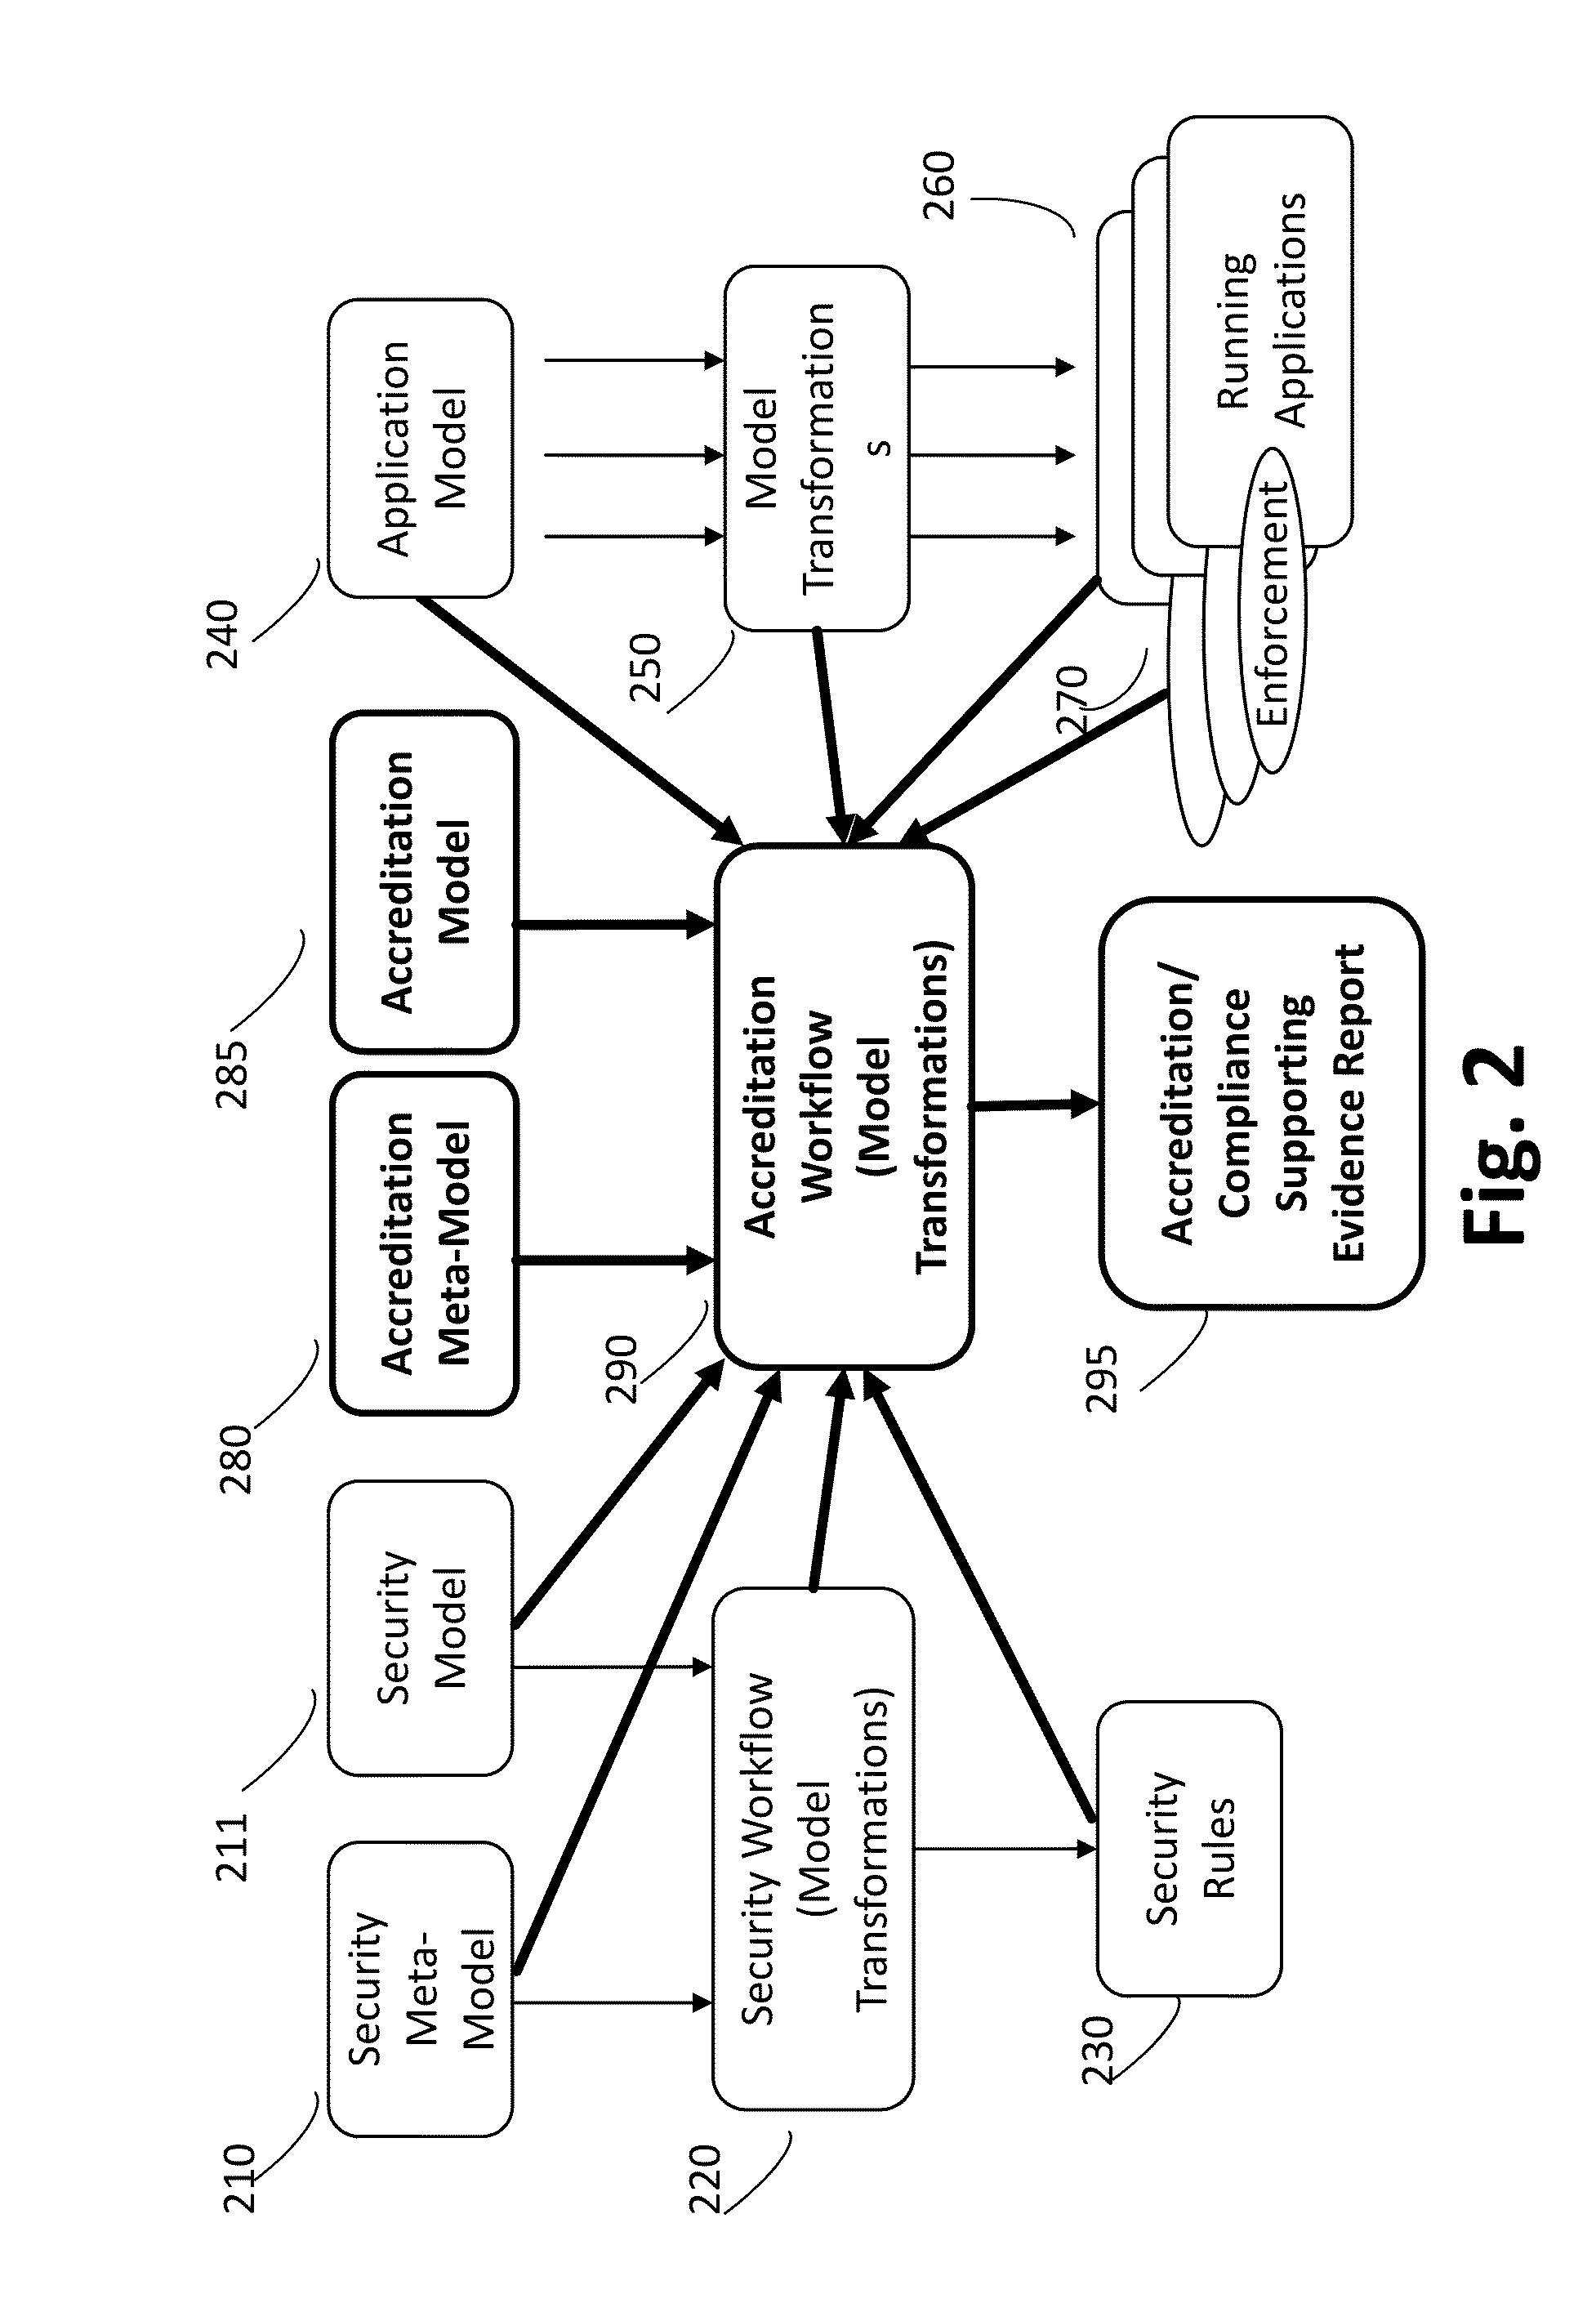 Automated and adaptive model-driven security system and method for operating the same